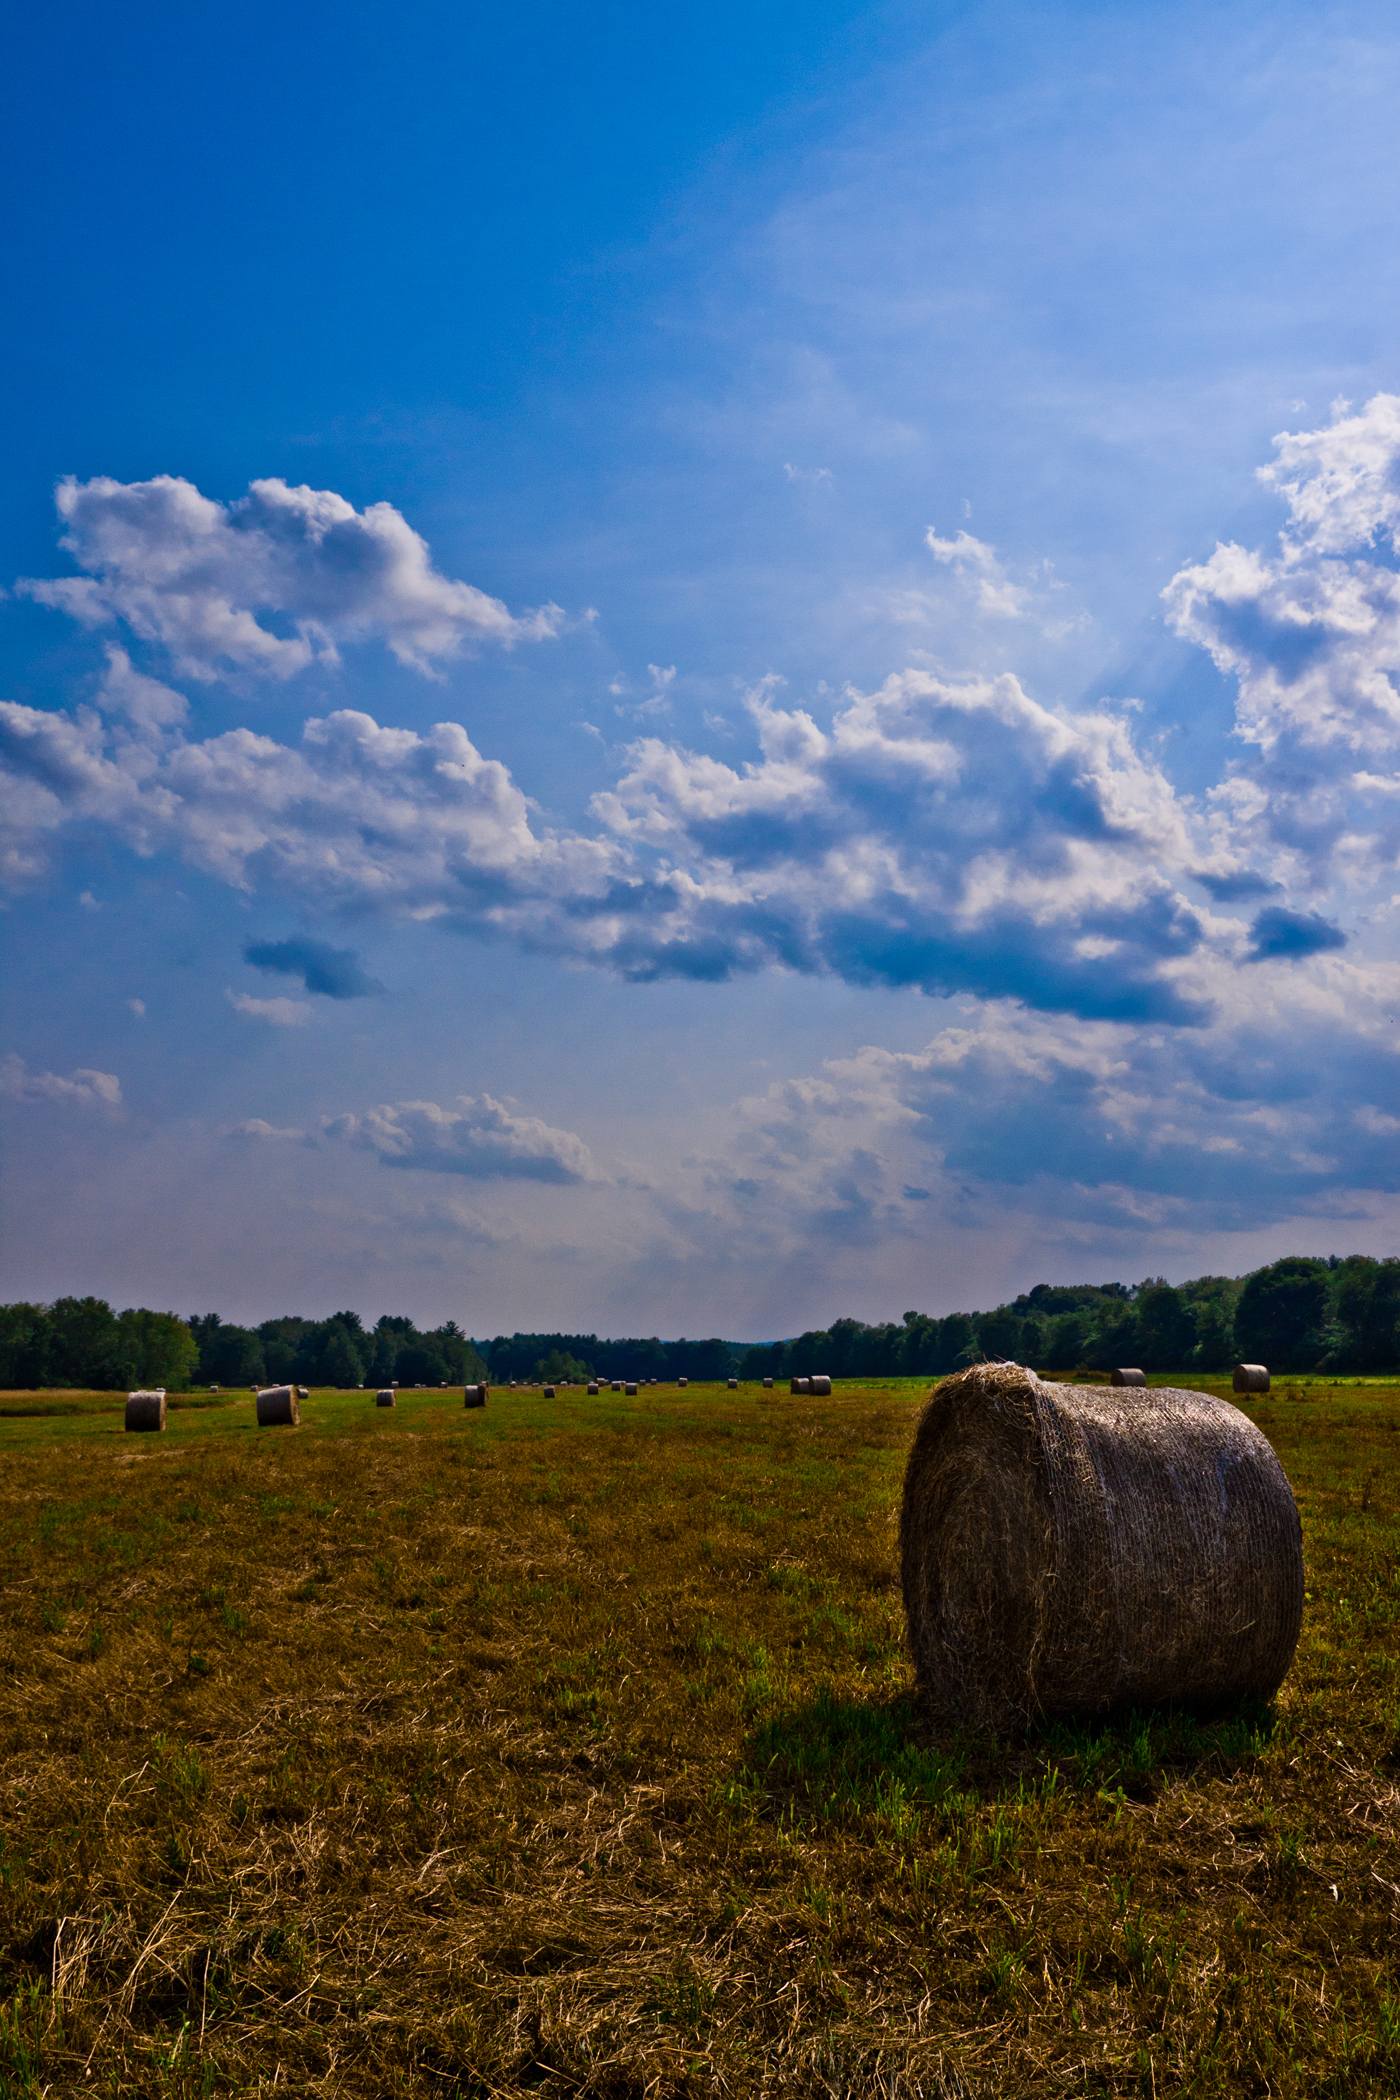 Summer Hay Bale (user submitted)